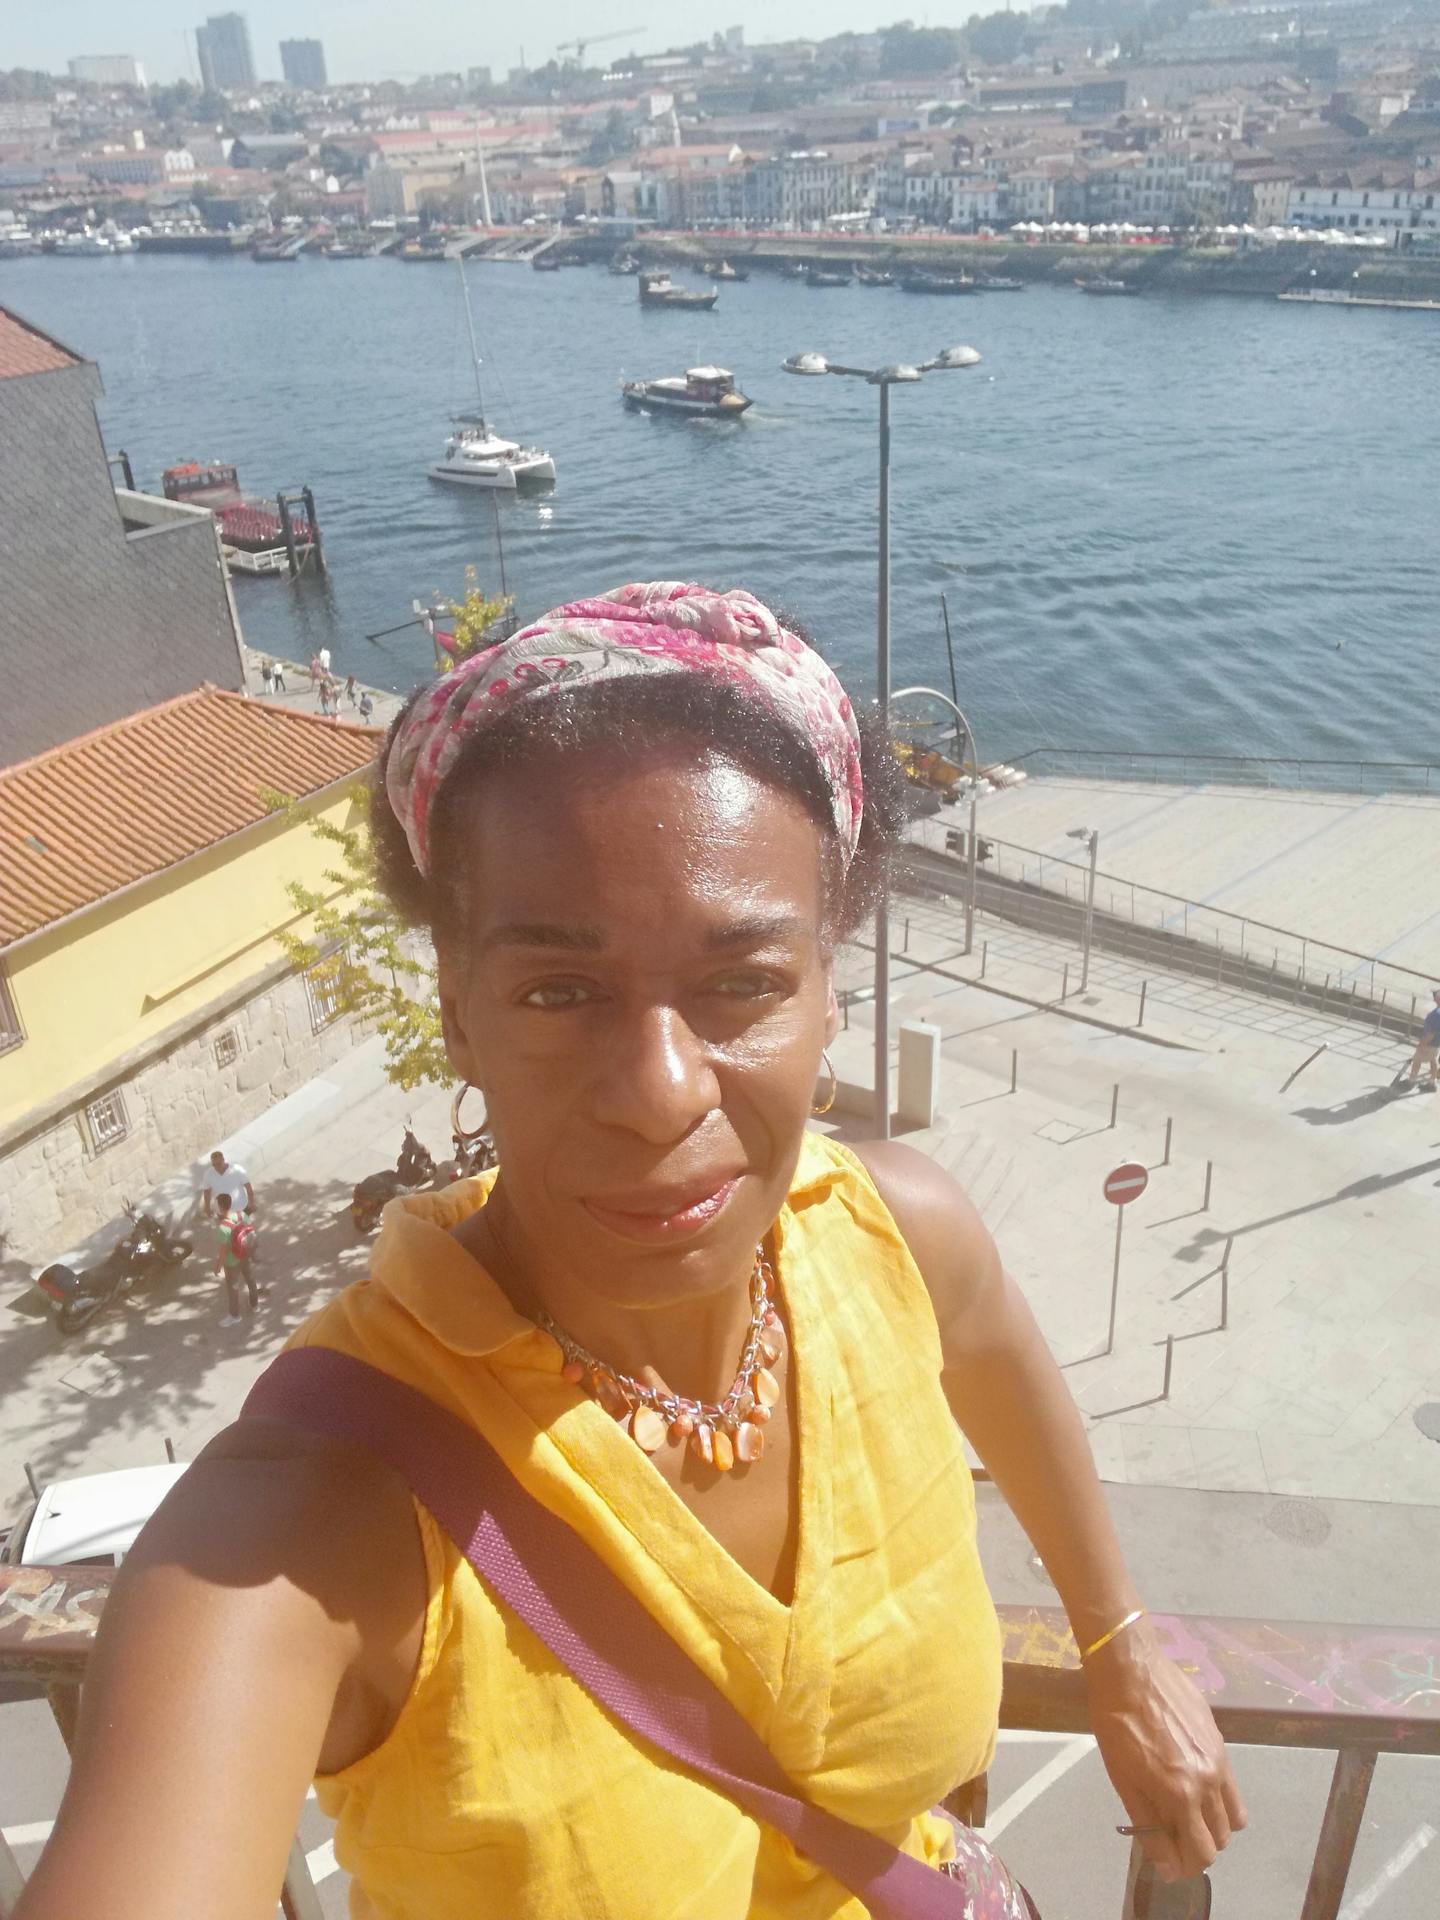 Sarah Smith, a Black woman, stands, smiling, in front of a river in Porto, Portugal on a sunny day, wearing a yellow sleeveless blouse and a red colourful bandana covering some of her hair.